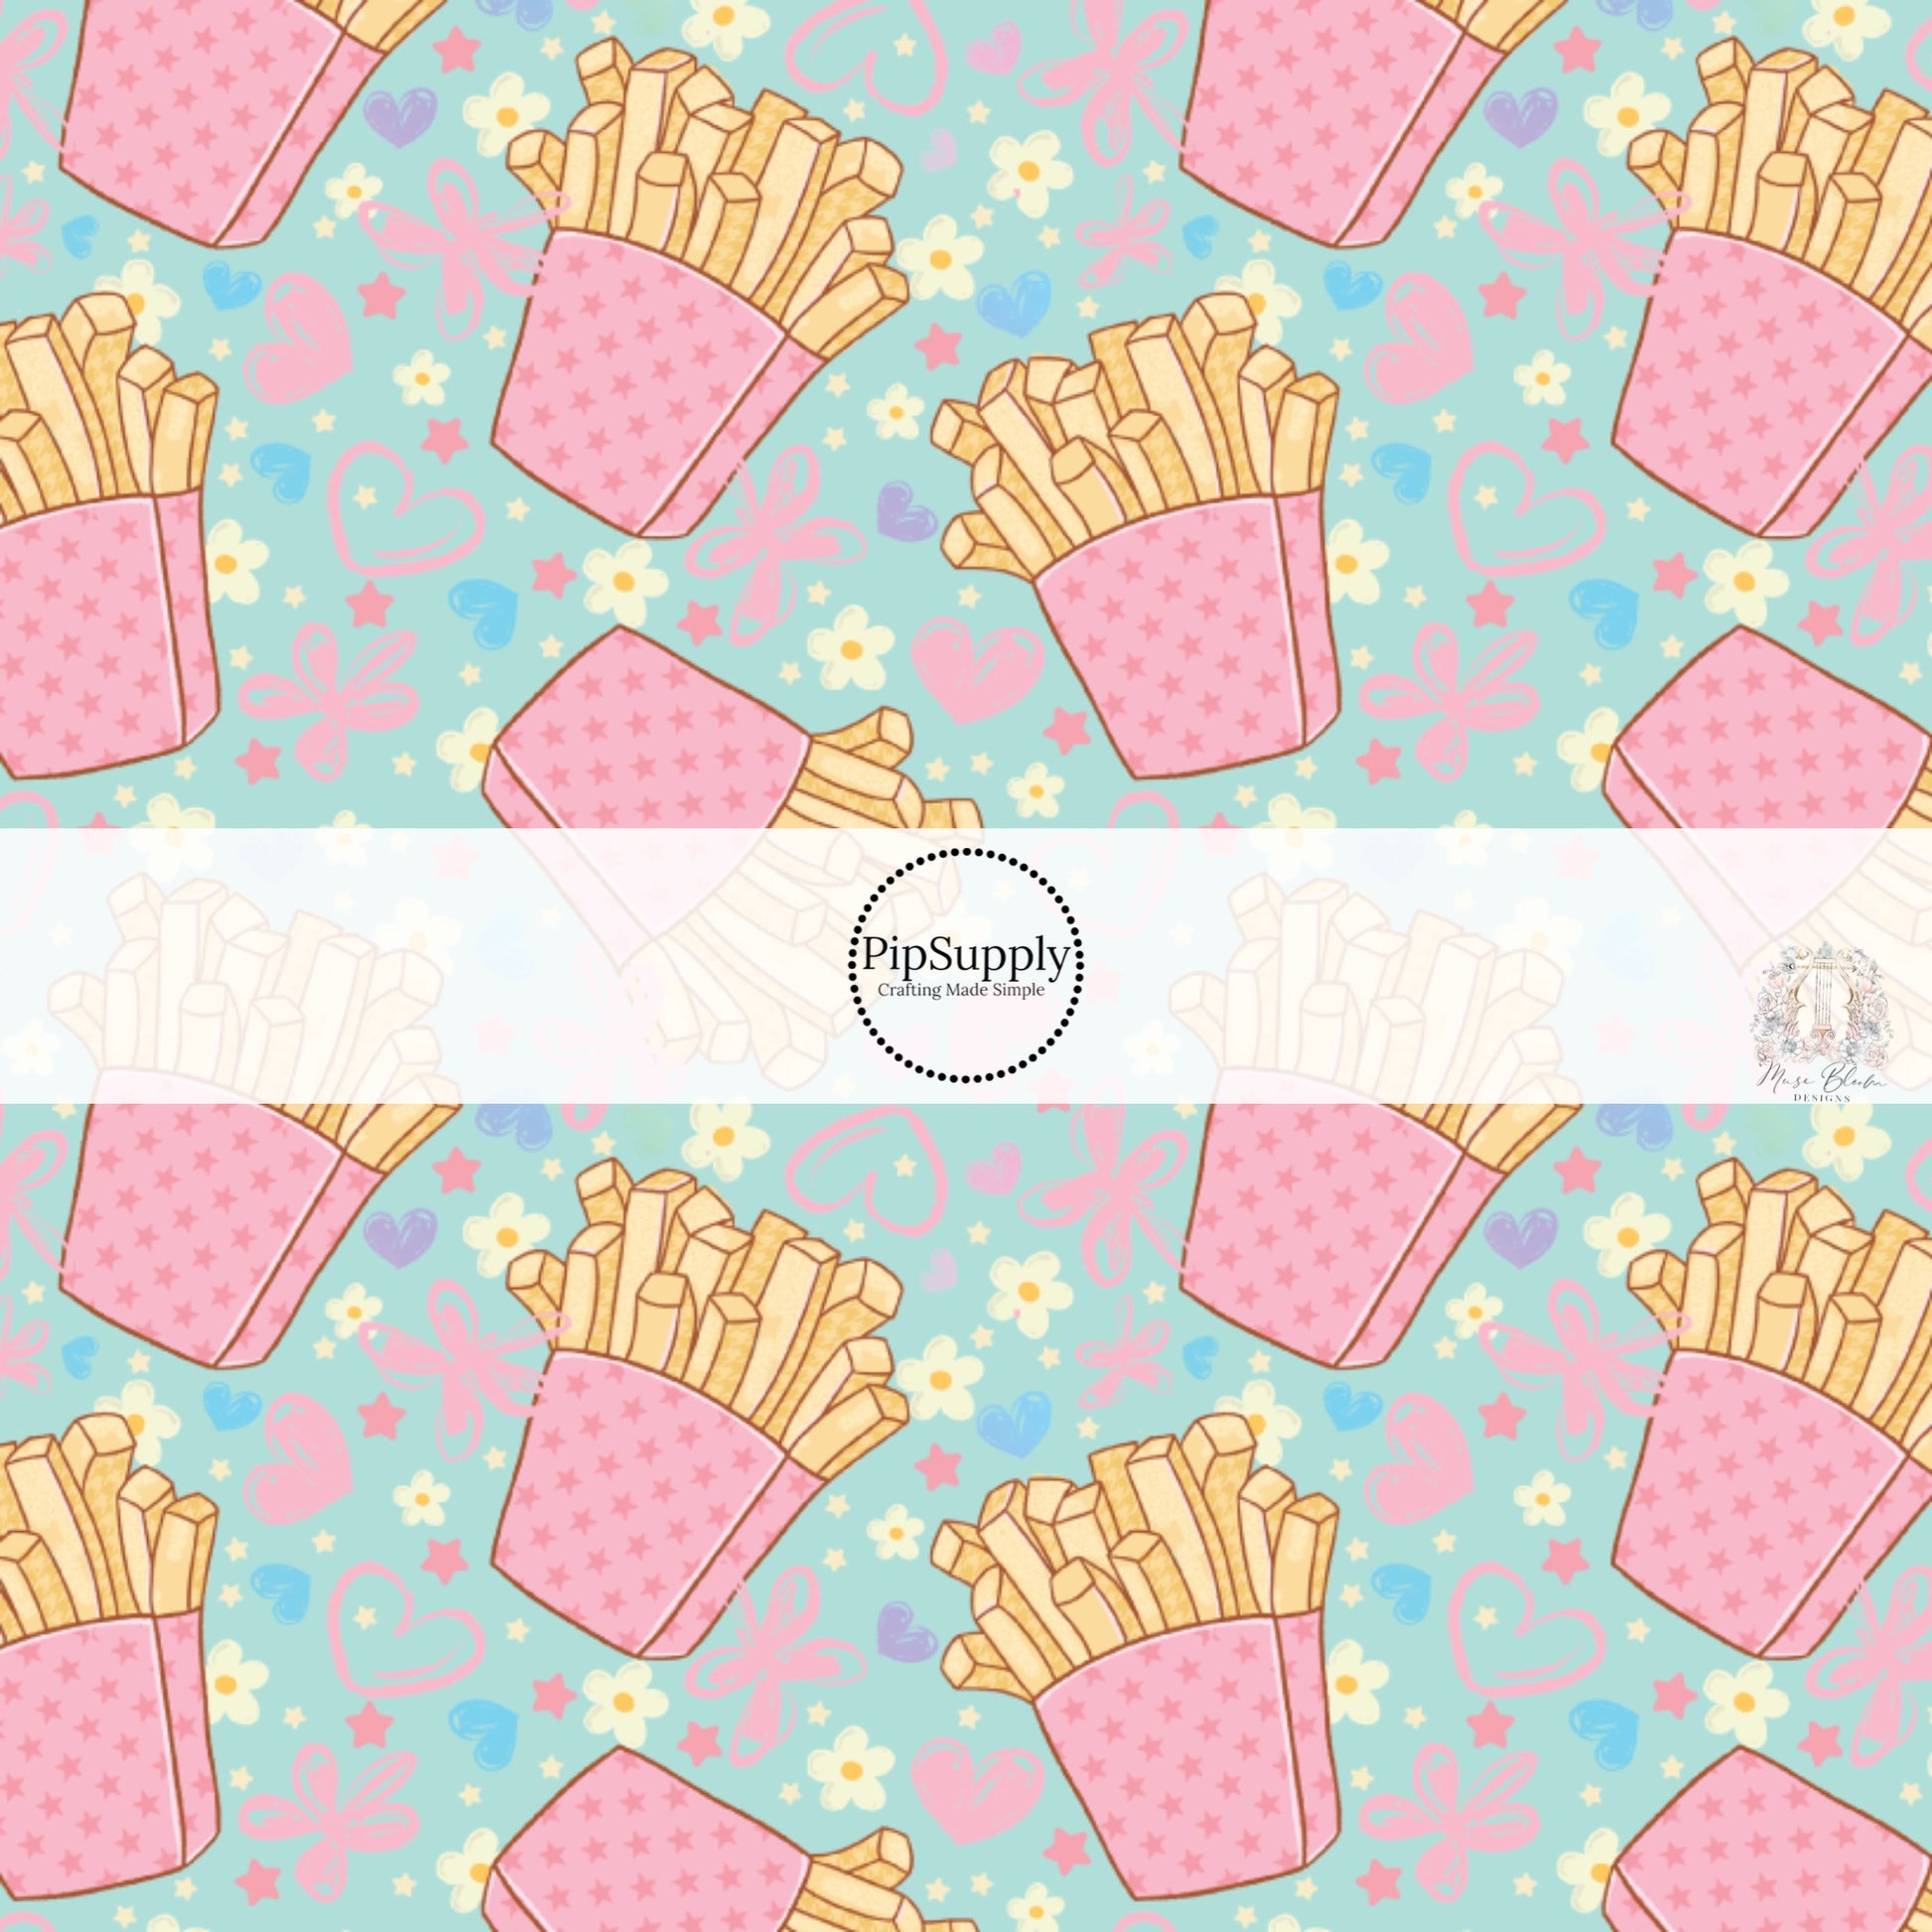 French Fries and Hearts Valentine's Day Themed Fabric by the Yard.